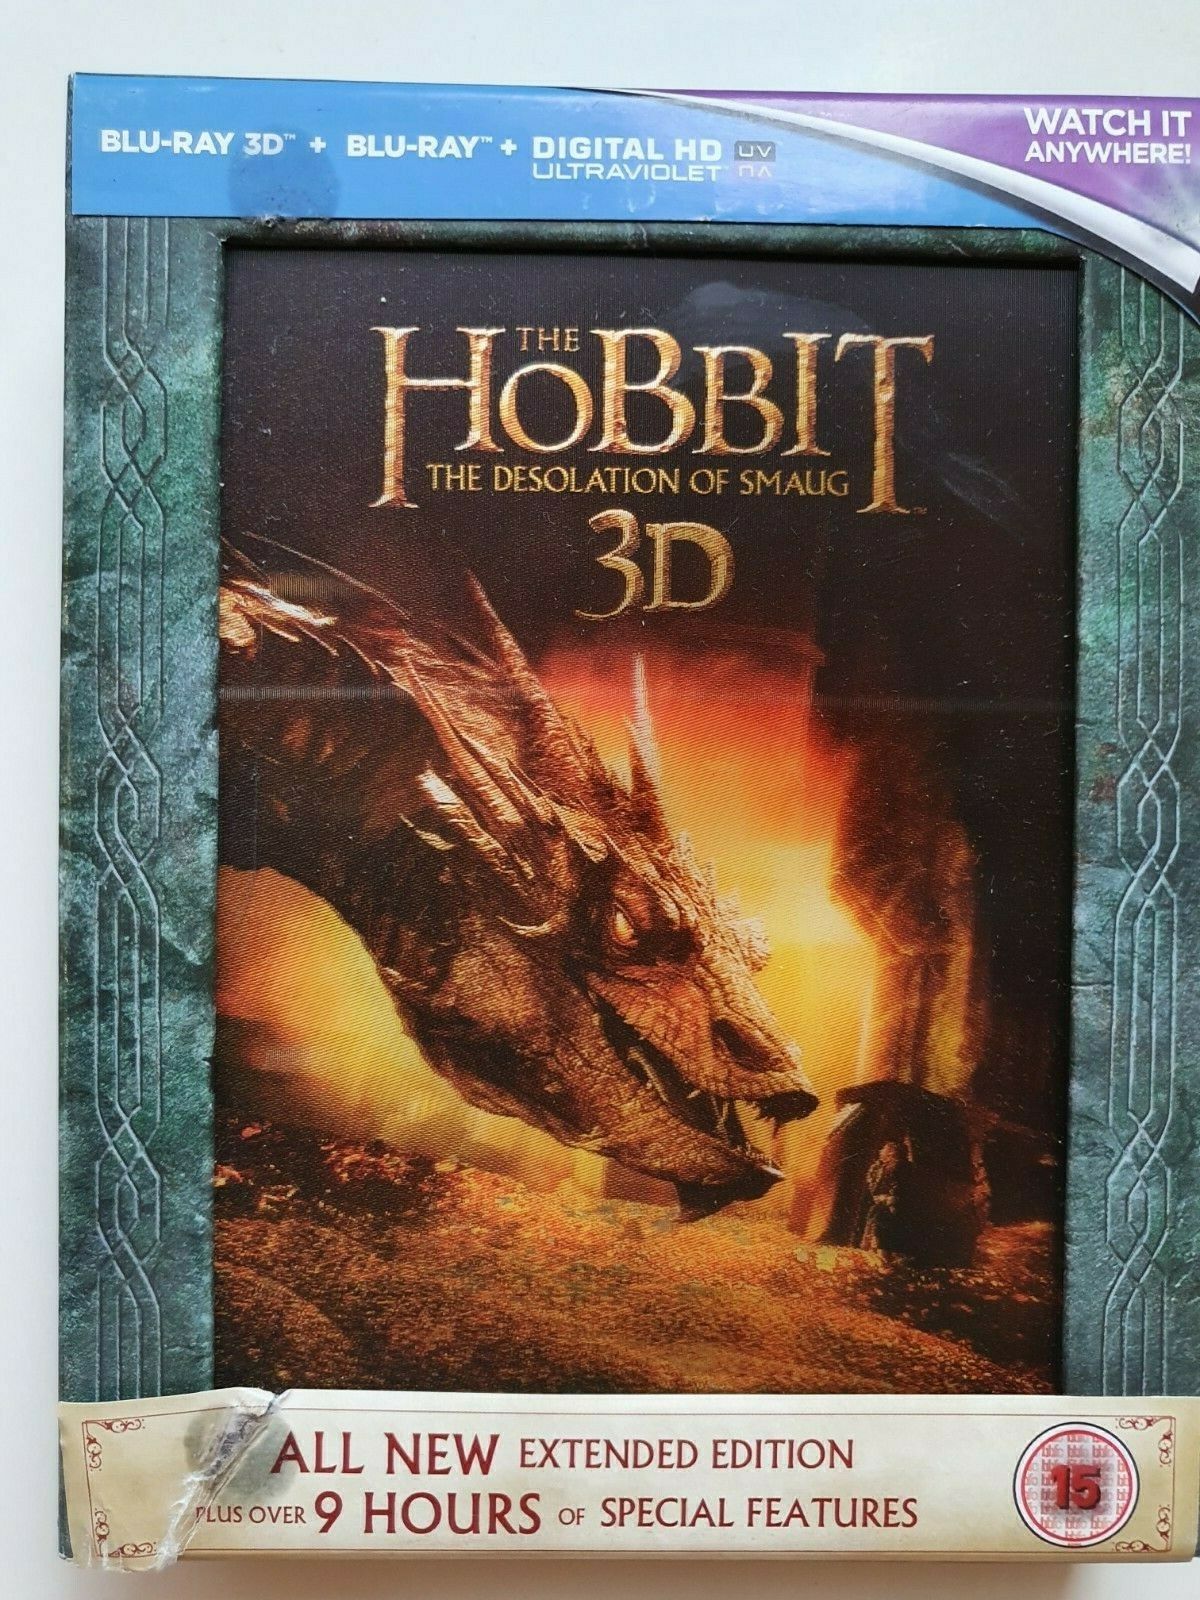 5051892175975 The Hobbit: The Desolation of Smaug 3D - Extended Edition Blu-ray2013 VERY GOOD